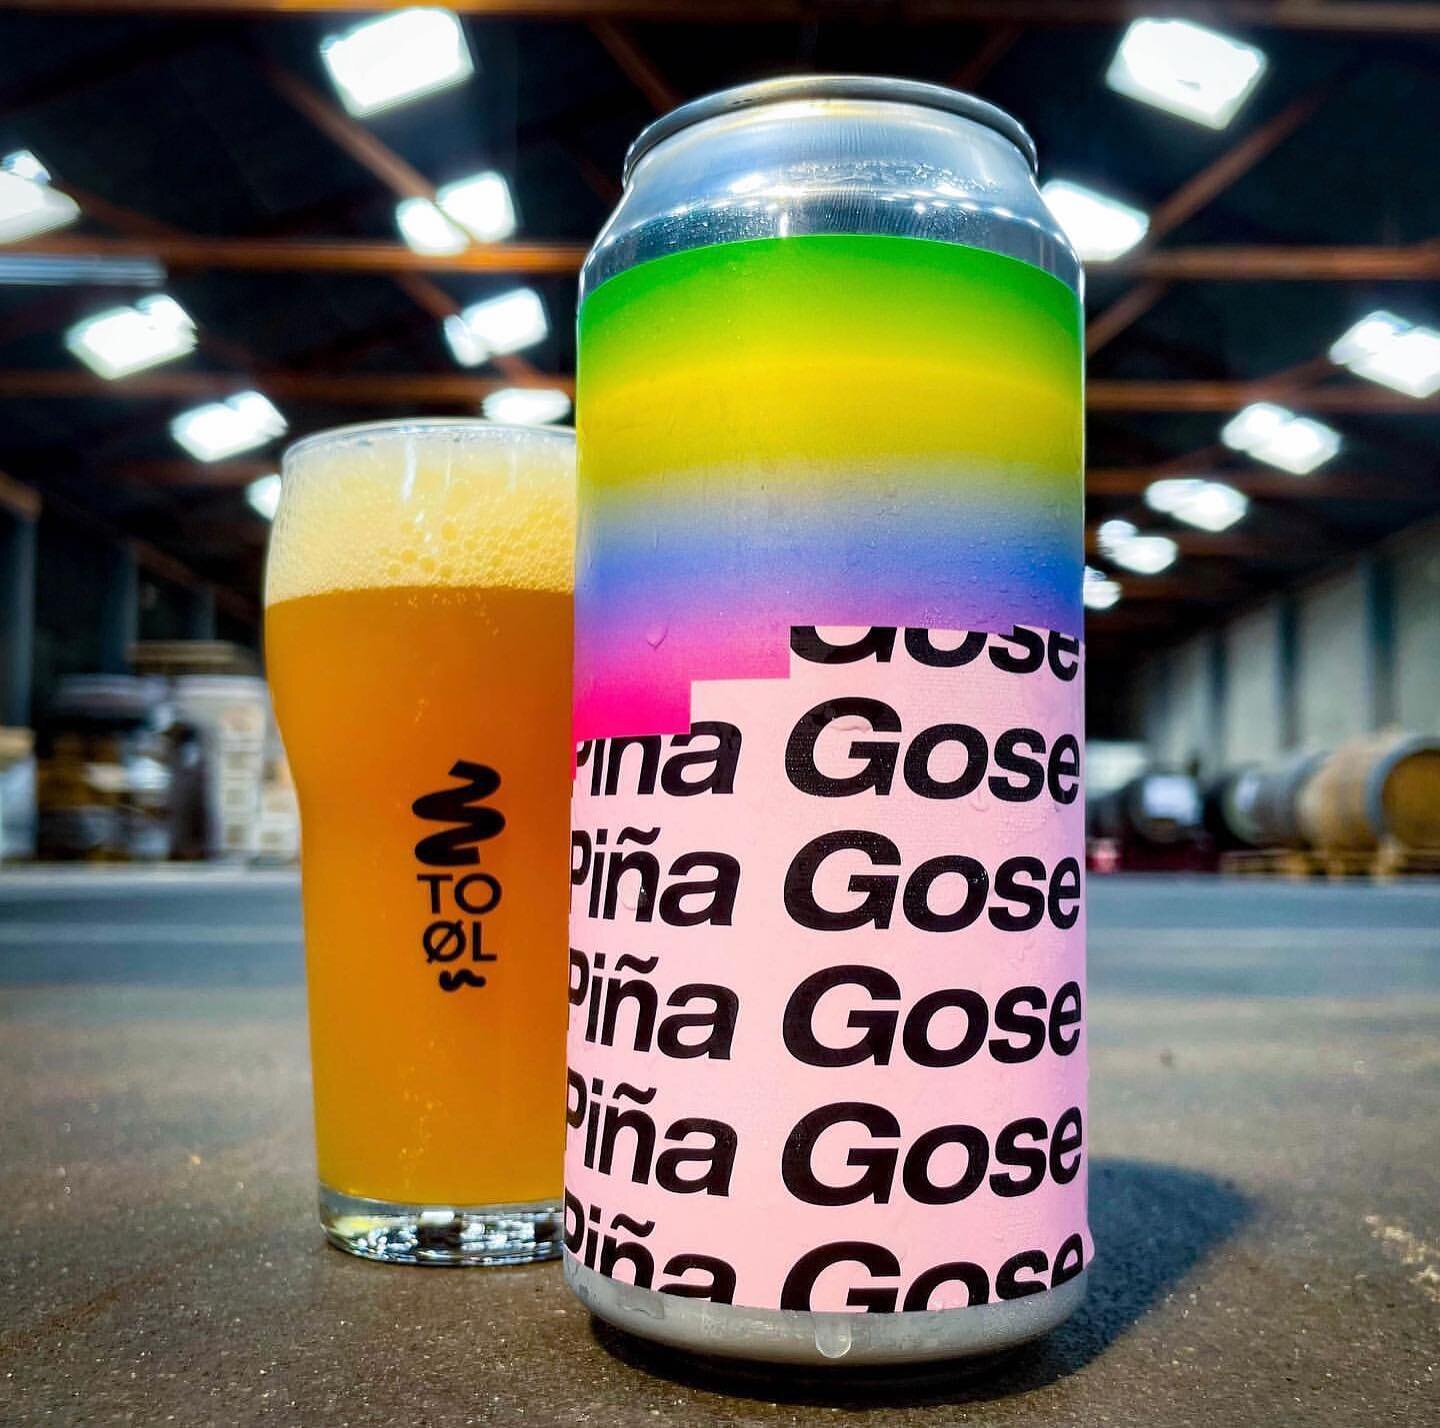 Made for weather like today&rsquo;s! 🌞 

𝐏𝐢𝐧̃𝐚 𝐆𝐨𝐬𝐞 🍍☀️🏝⛱
A tart Gose brewed with pineapple juice and hops with beautiful coconut aromatics 🥥🥥

Ready for delivery 🚚 next week